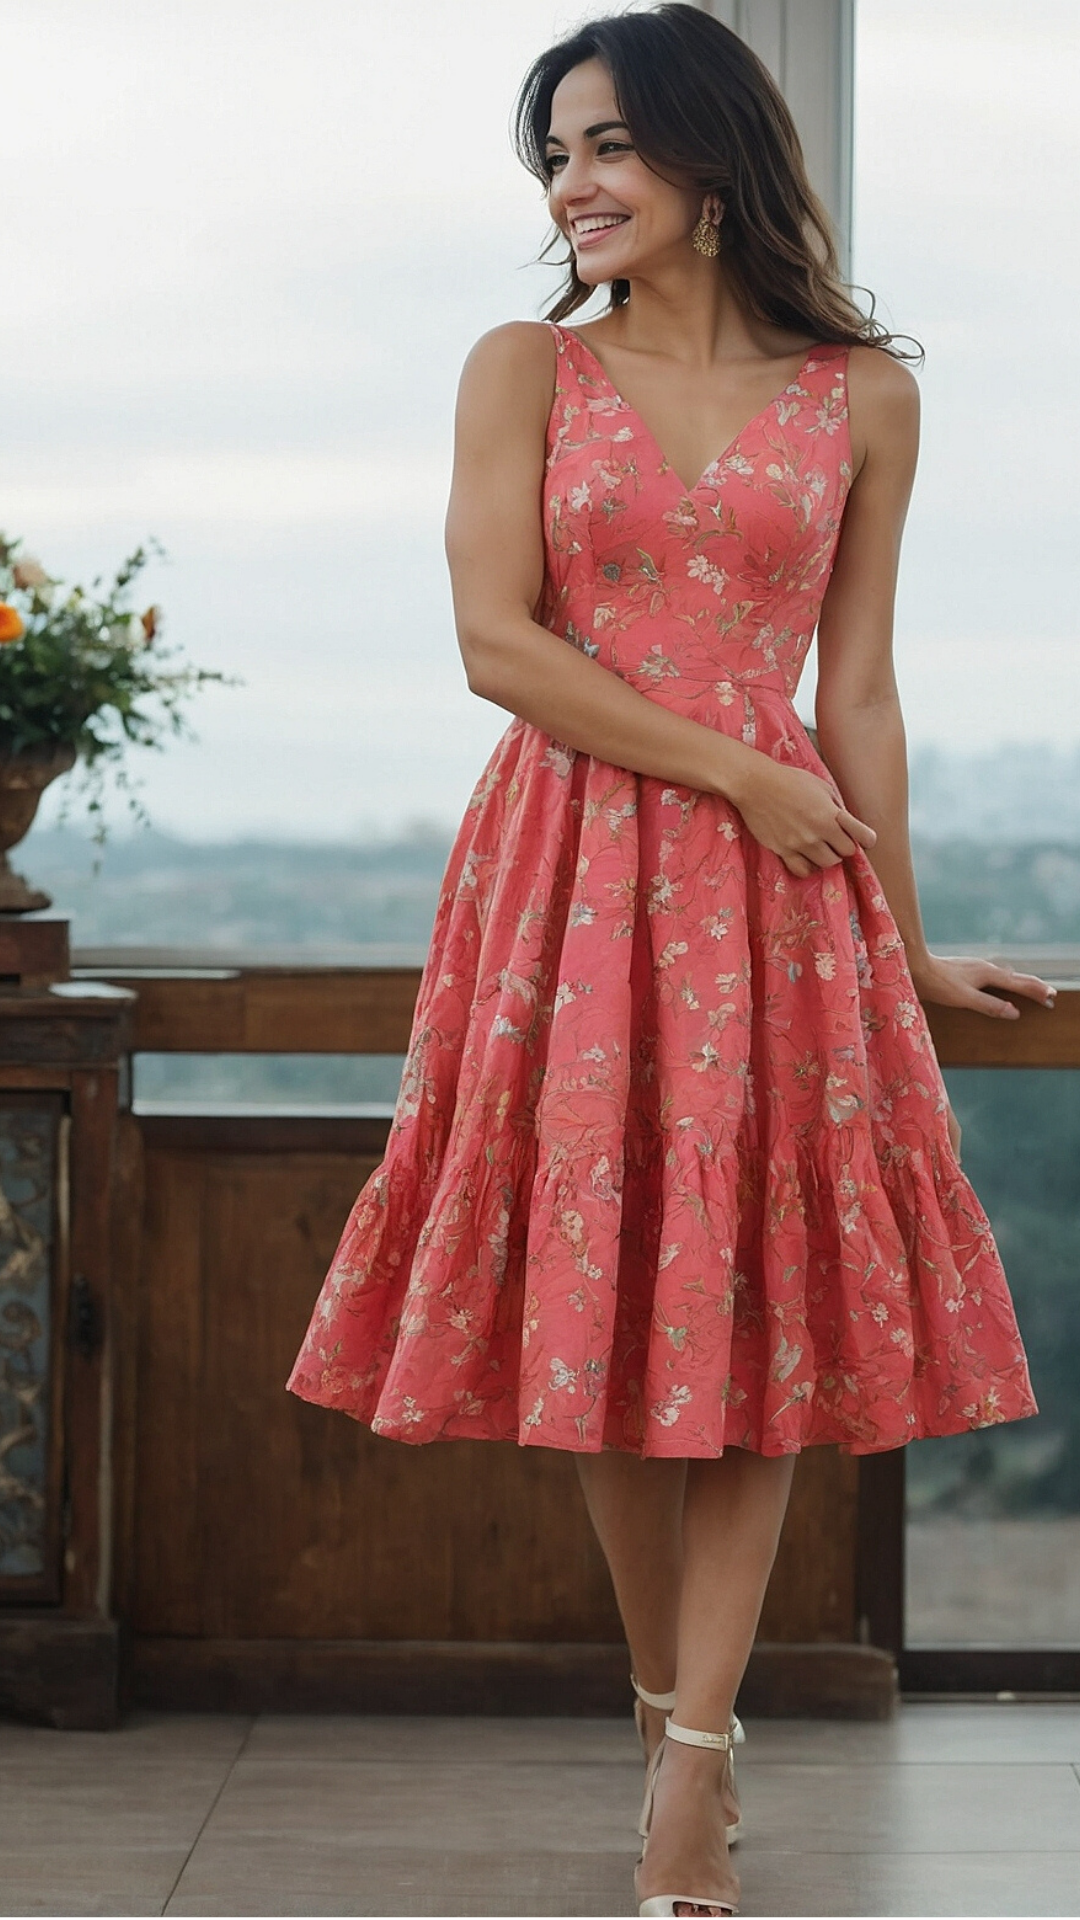 Sundress Sweetness: Adorable Frock Outfits